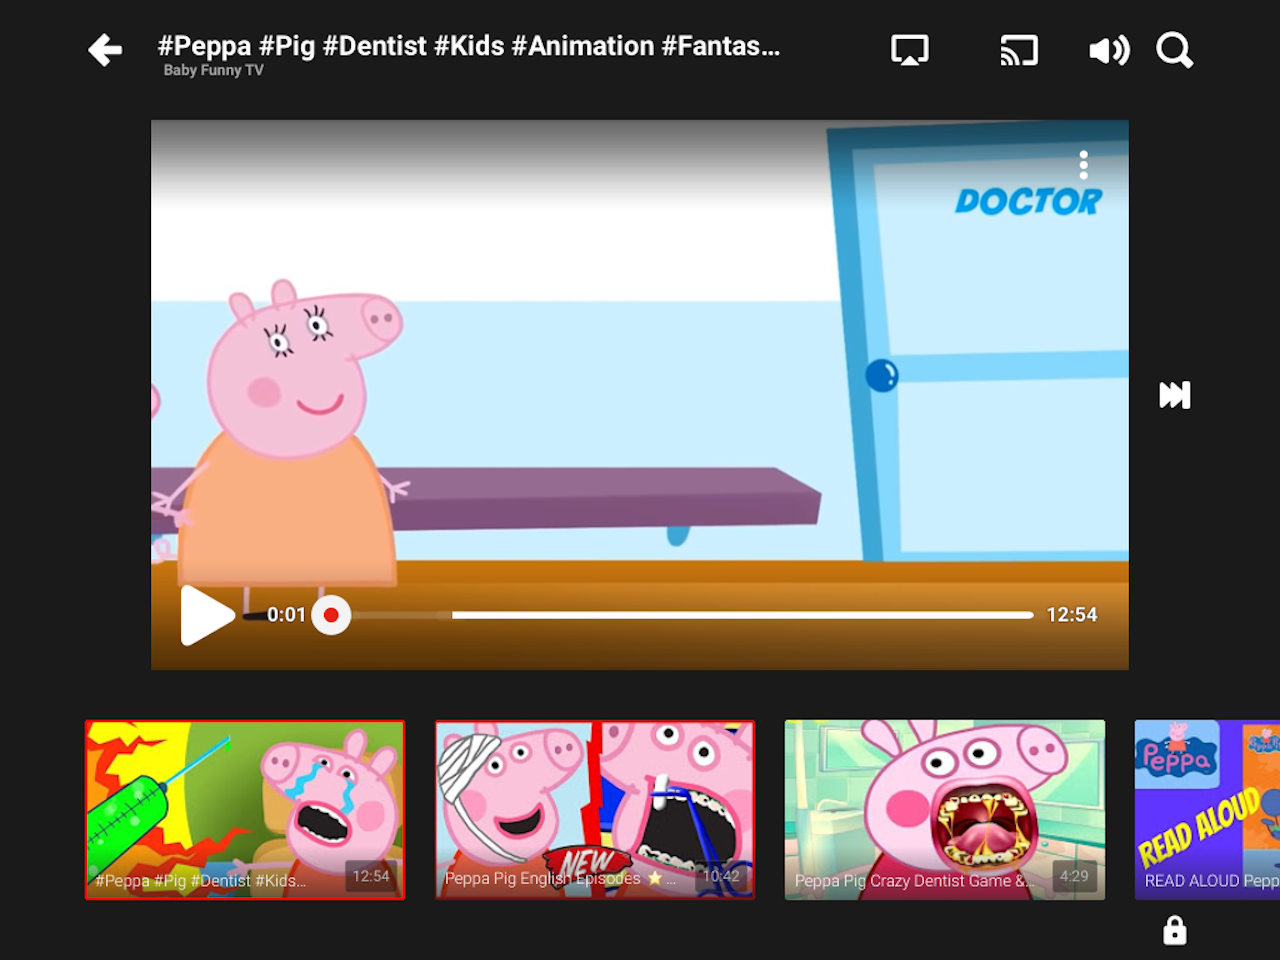 YouTube has a fake Peppa Pig problem | The Outline